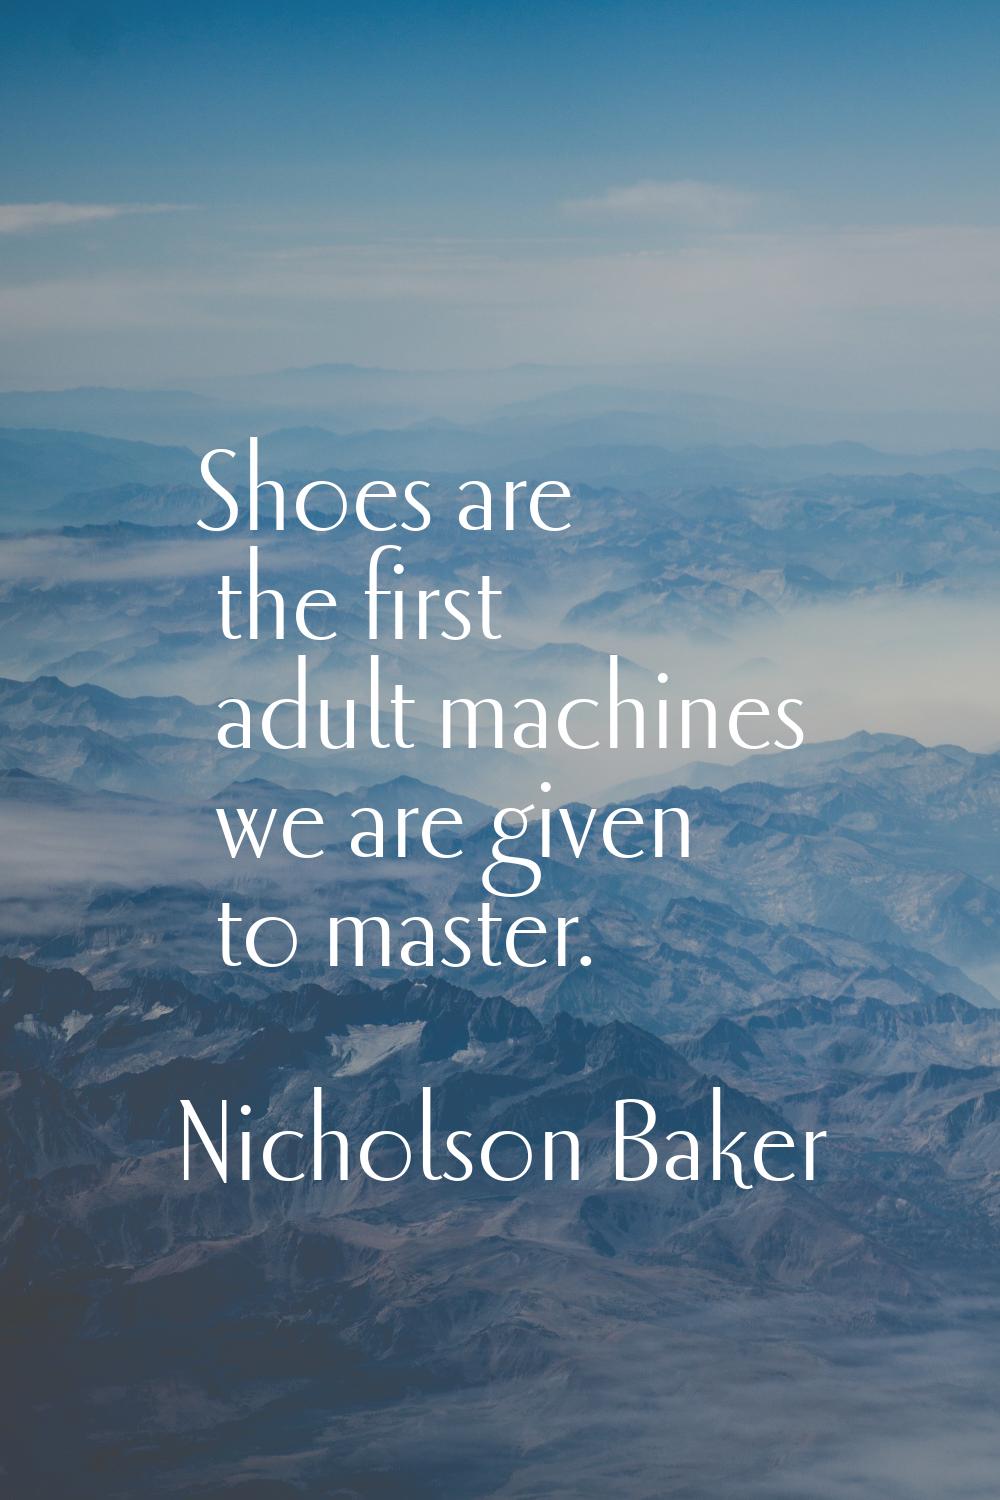 Shoes are the first adult machines we are given to master.